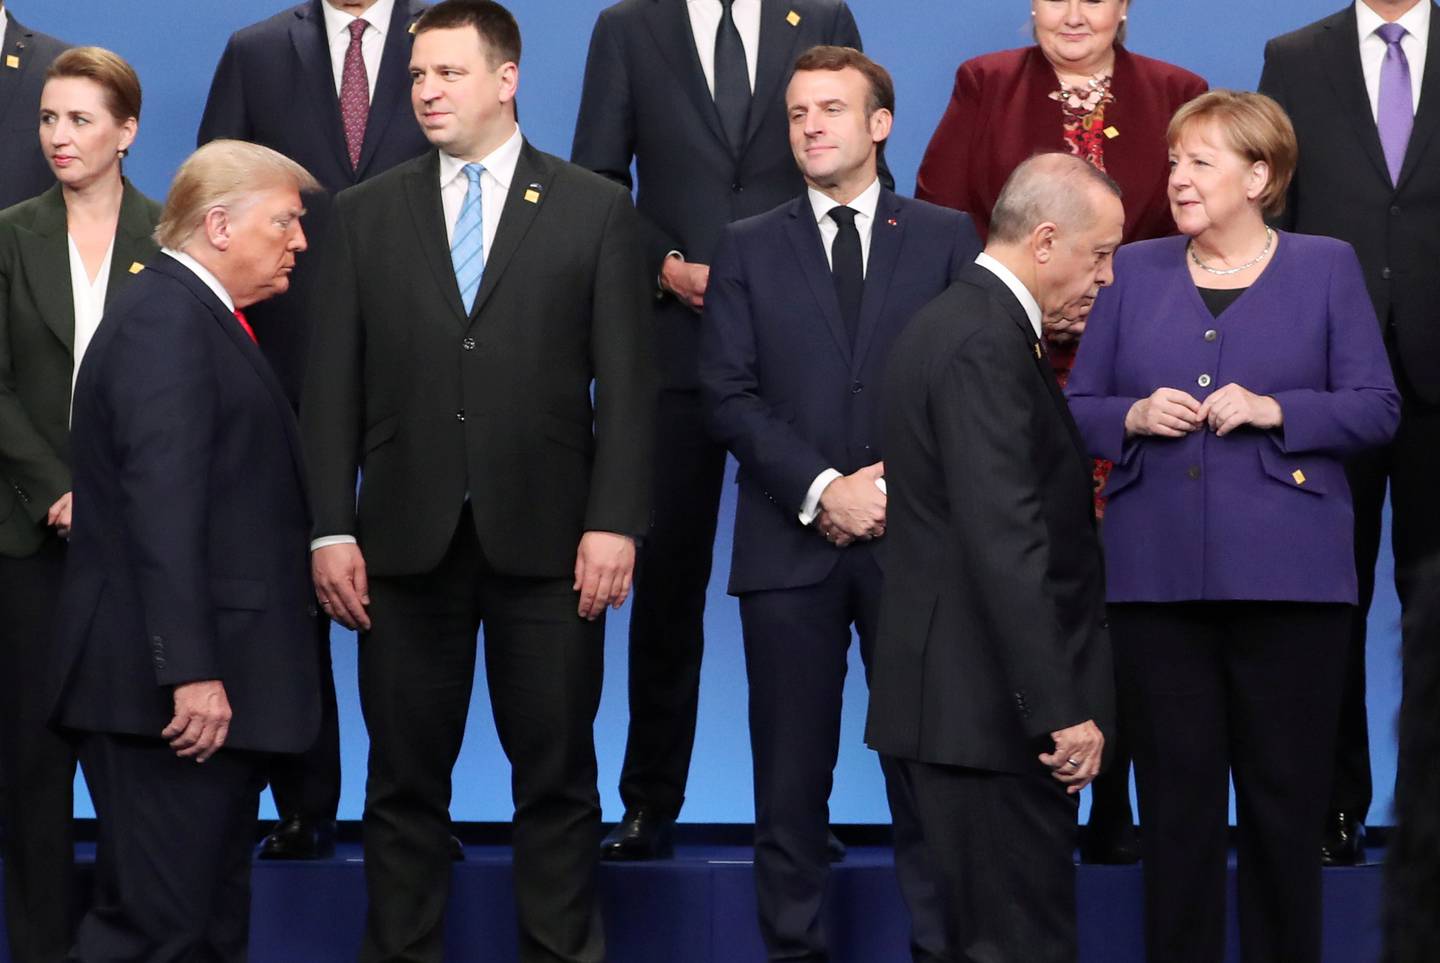 Germany's Chancellor Angela Merkel, Turkey's President President Tayyip Erdogan, U.S. President Donald Trump and France's President Emmanuel Macron during the photo opportunity at the NATO leaders summit in Watford, Britain December 4, 2019. REUTERS/Yves Herman     TPX IMAGES OF THE DAY